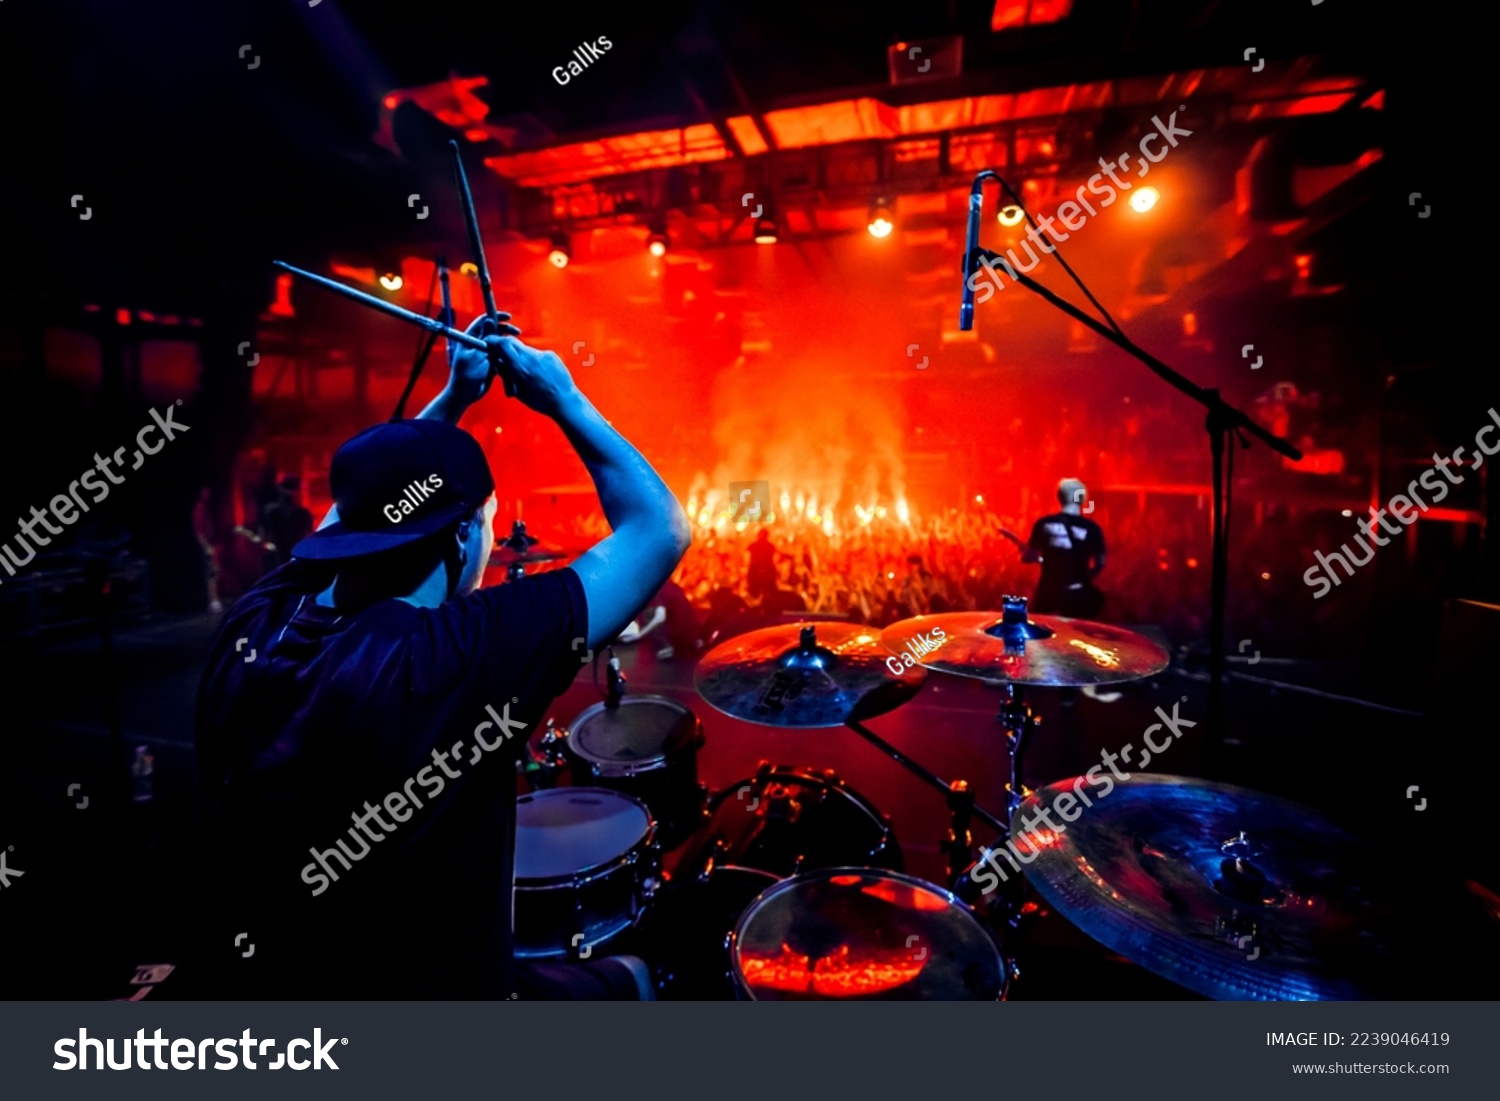 Rock concert poster. A drummer plays drums during a show. Band on a stage club.
 #2239046419